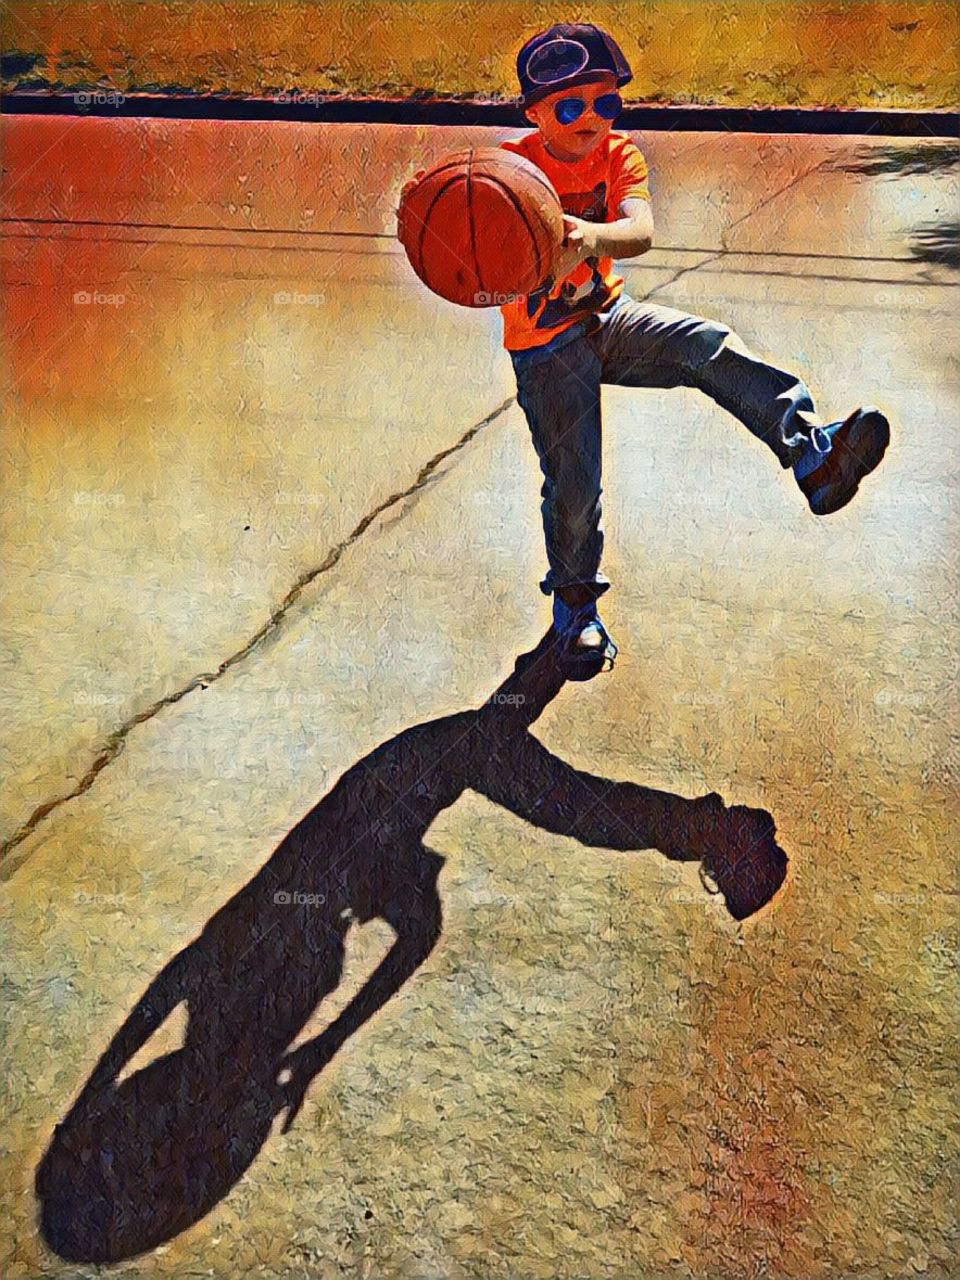 Sketched style abstract of boy and his shadow with basketball in the street.